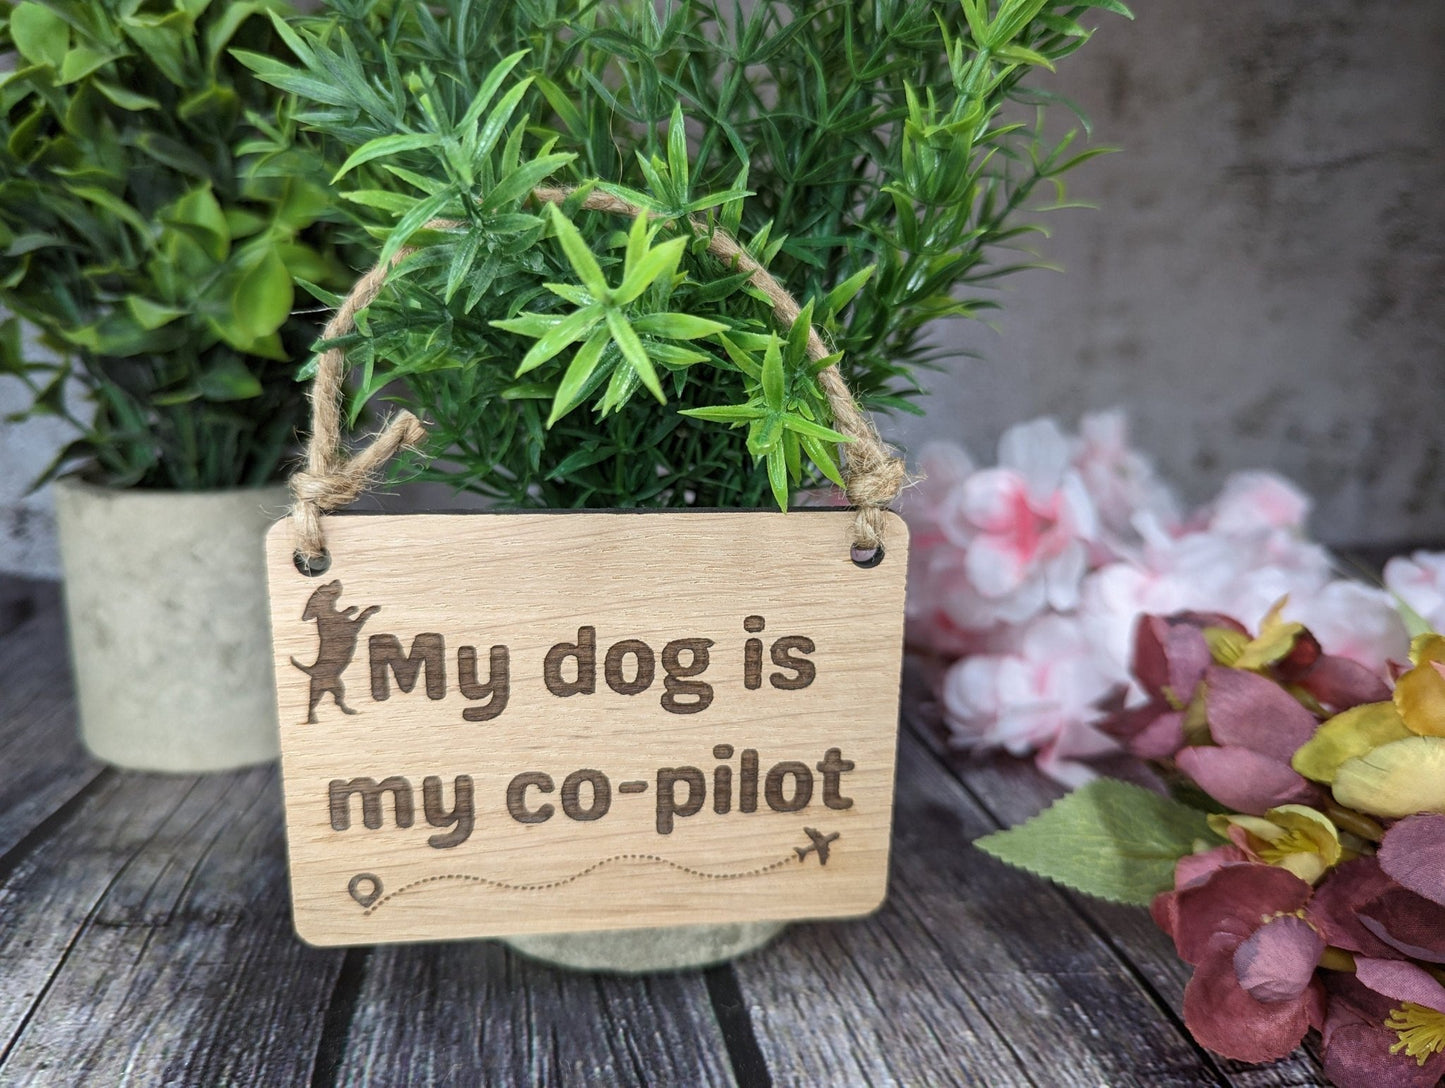 My Dog is my Co-Pilot - Wooden Sign | Wooden Hanging Sign for Dog Lovers | Doggy Birthday Gift | Bar Sign | Door Sign - CherryGroveCraft